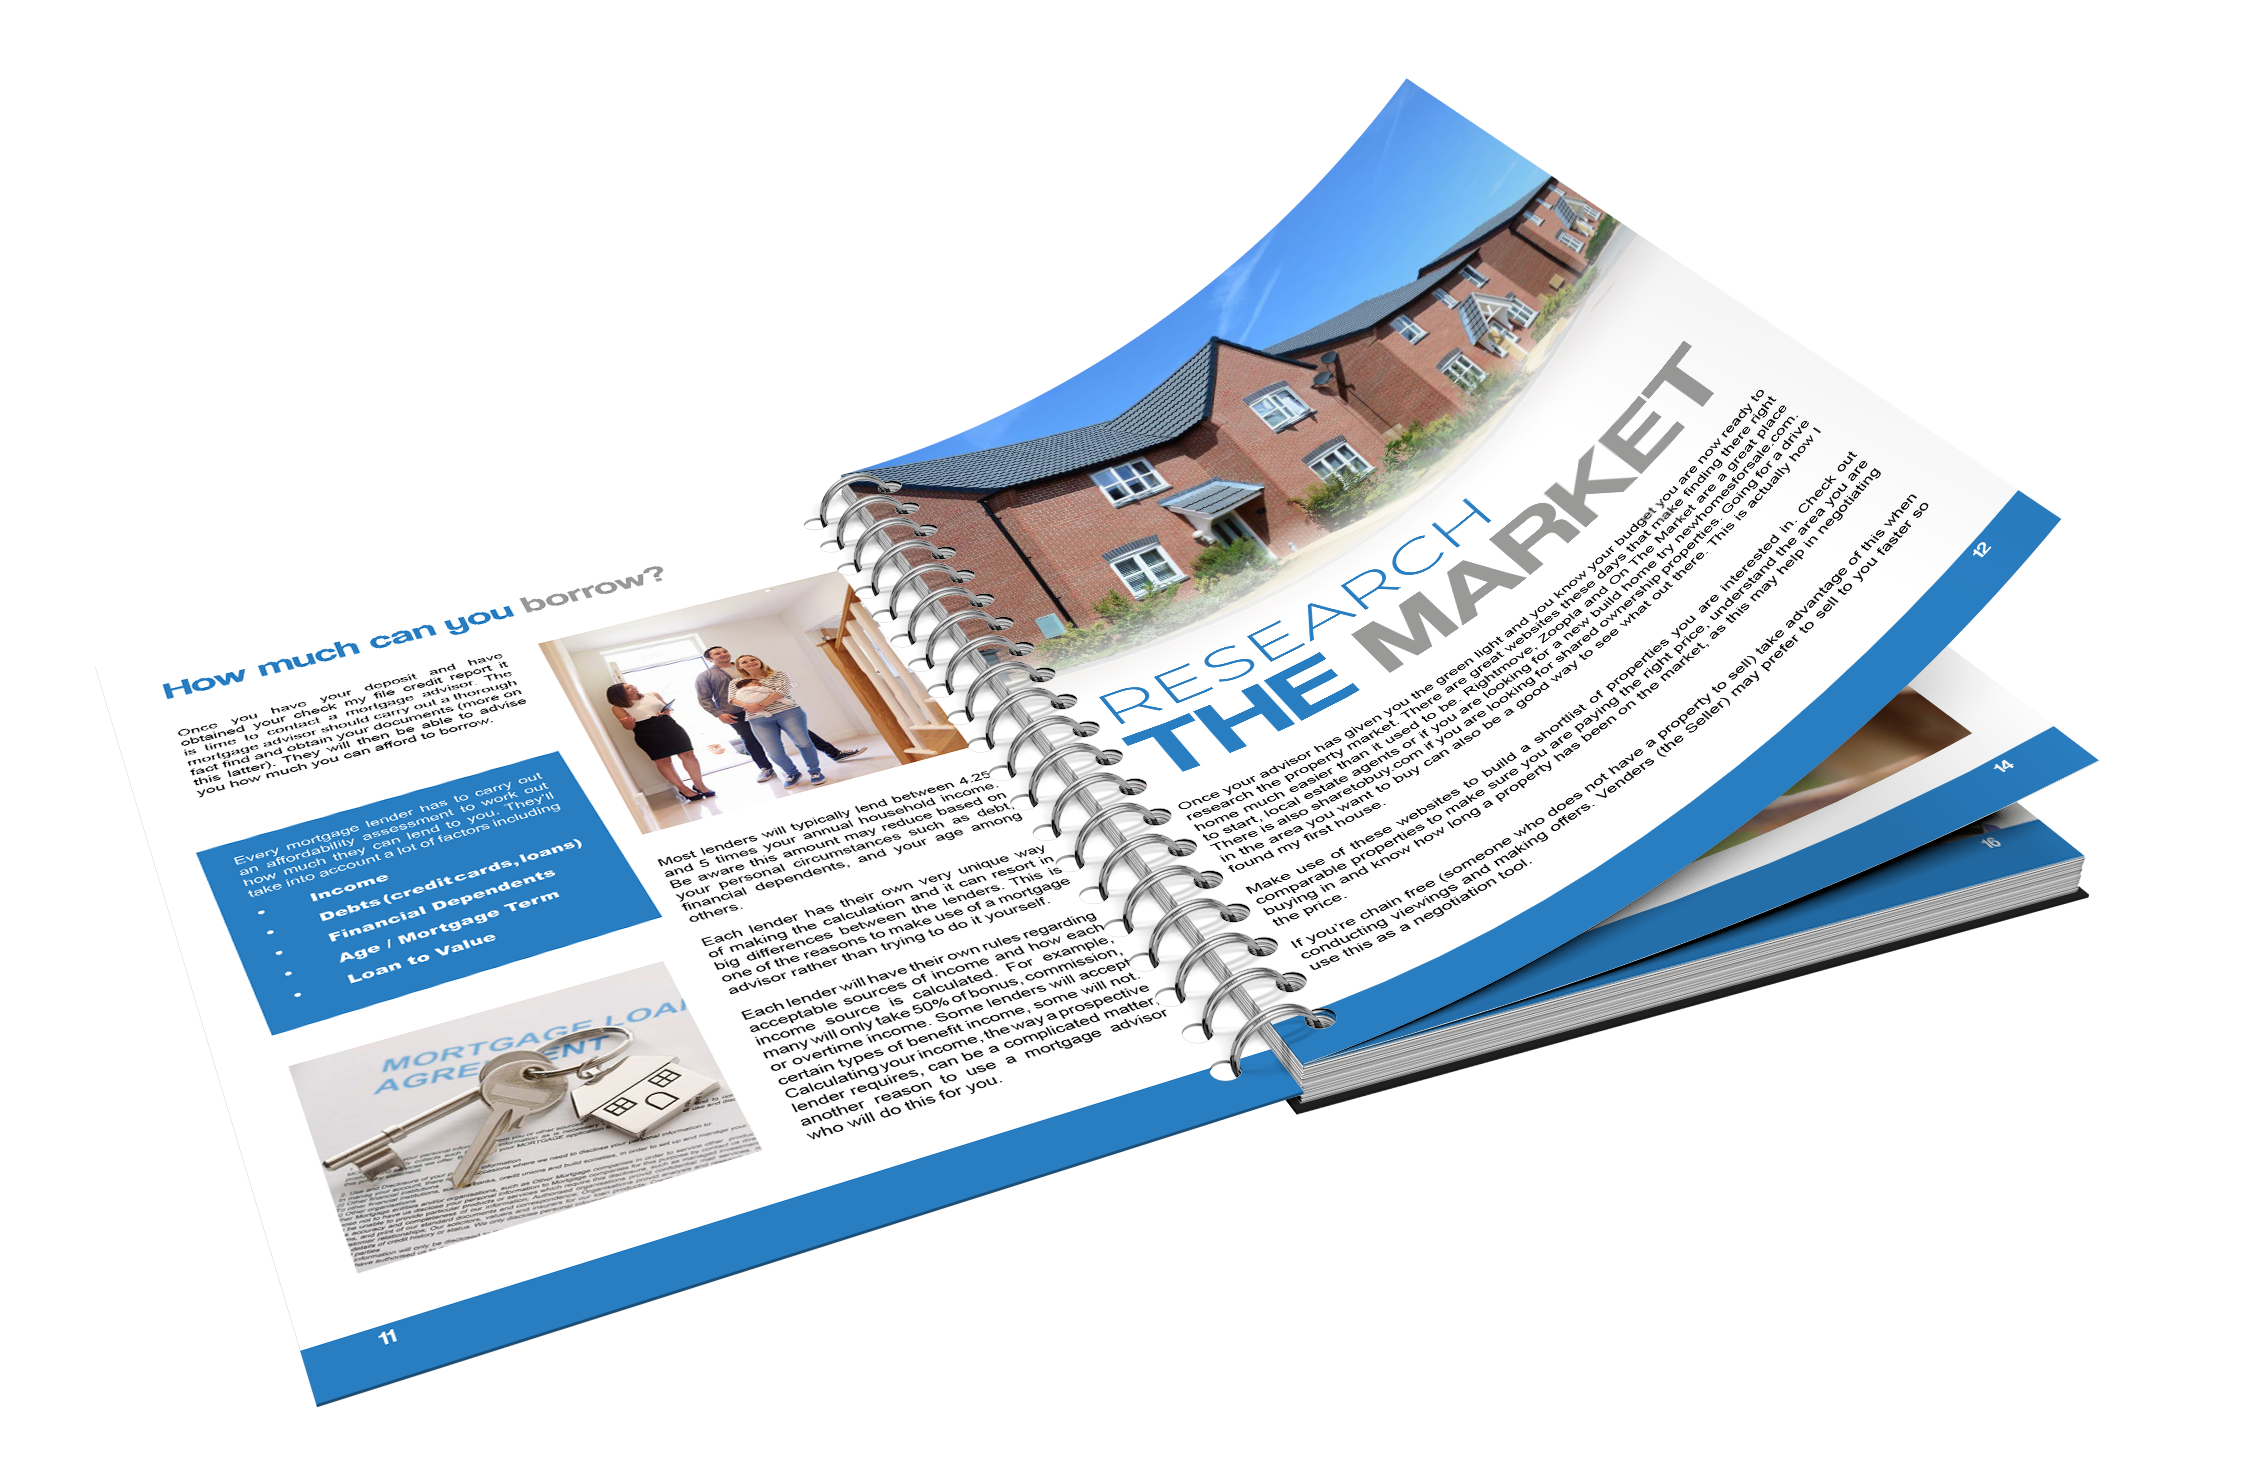 Home of My Own - First Time Buyers Handbook